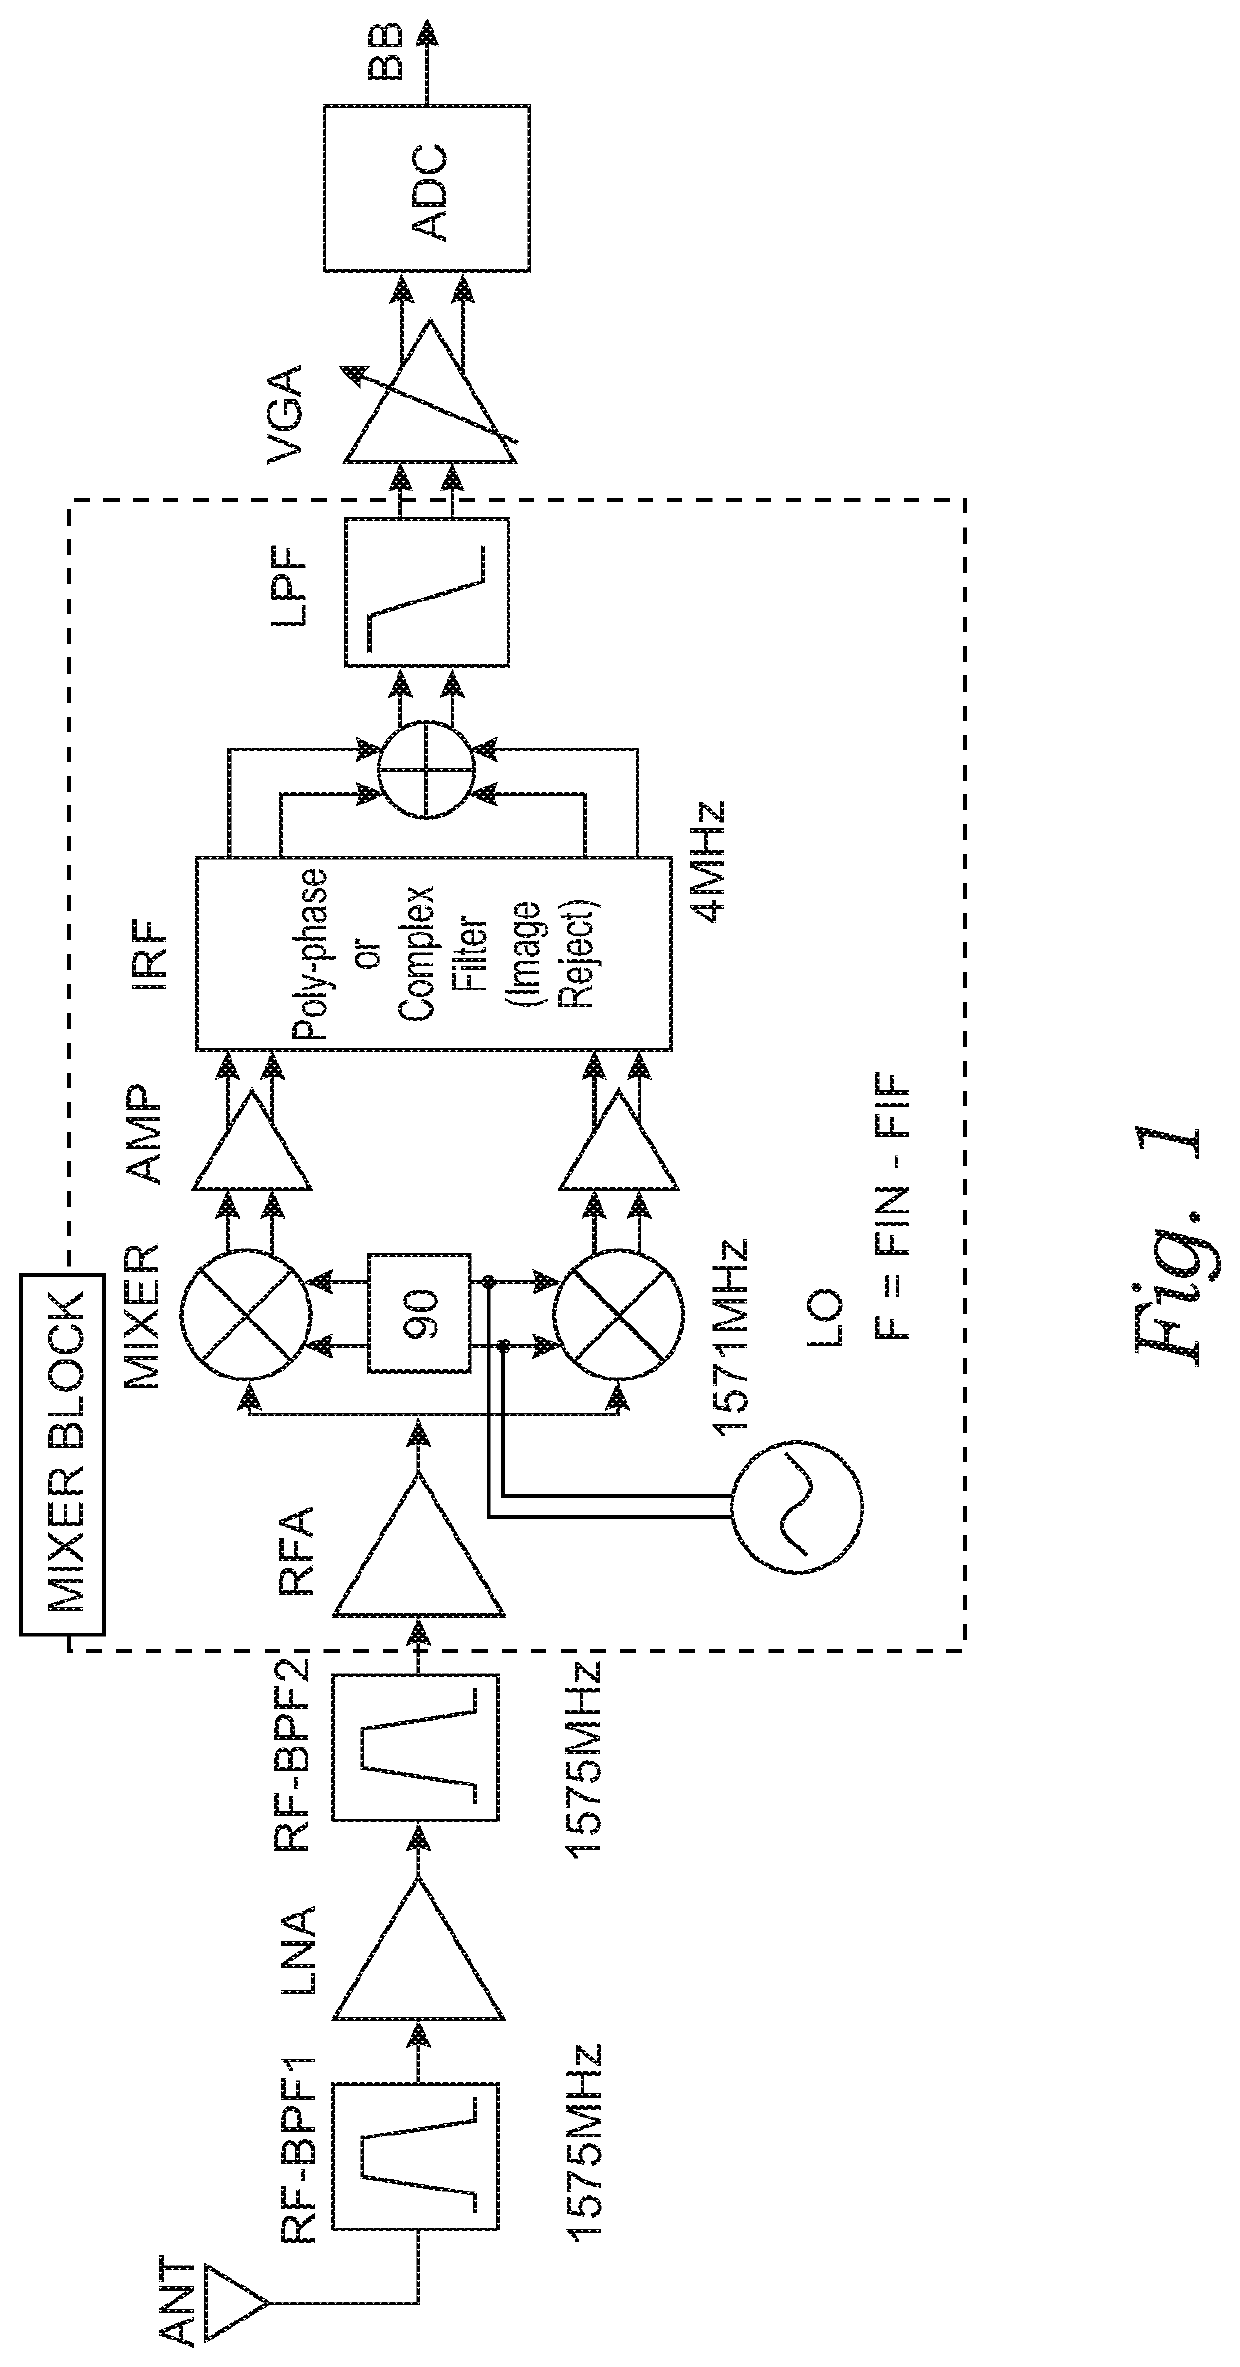 Receiver architectures with parametric circuits